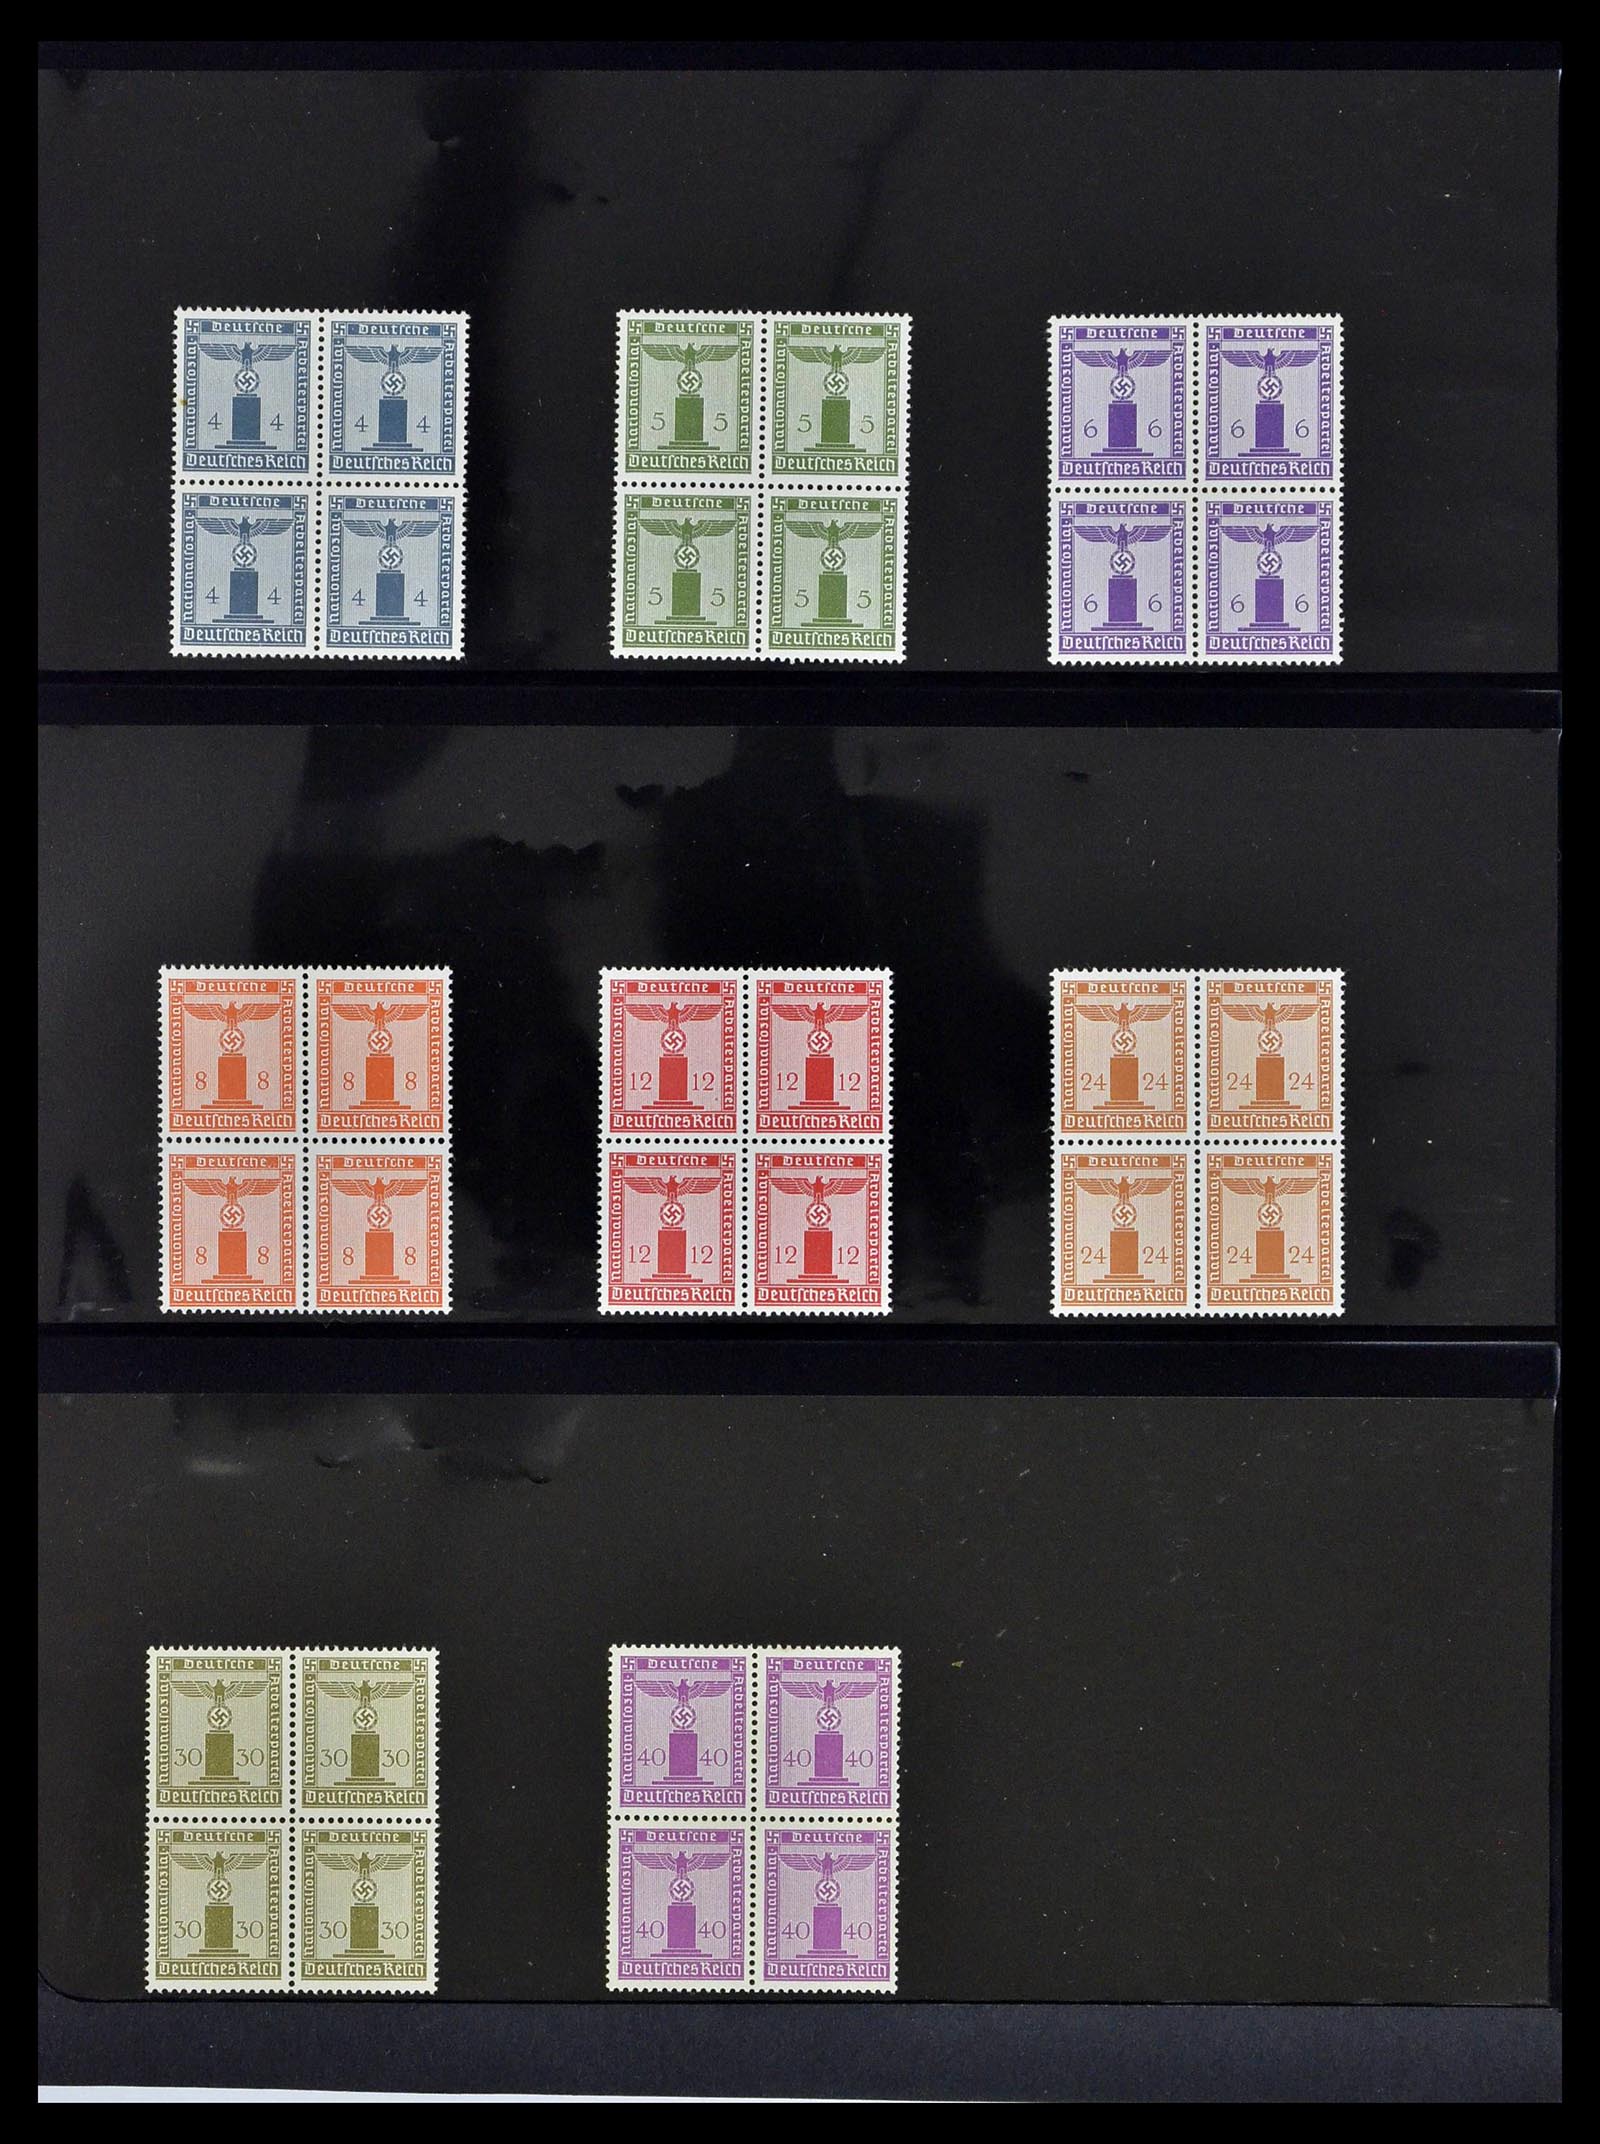 39255 0042 - Stamp collection 39255 German Reich MNH blocks of 4.